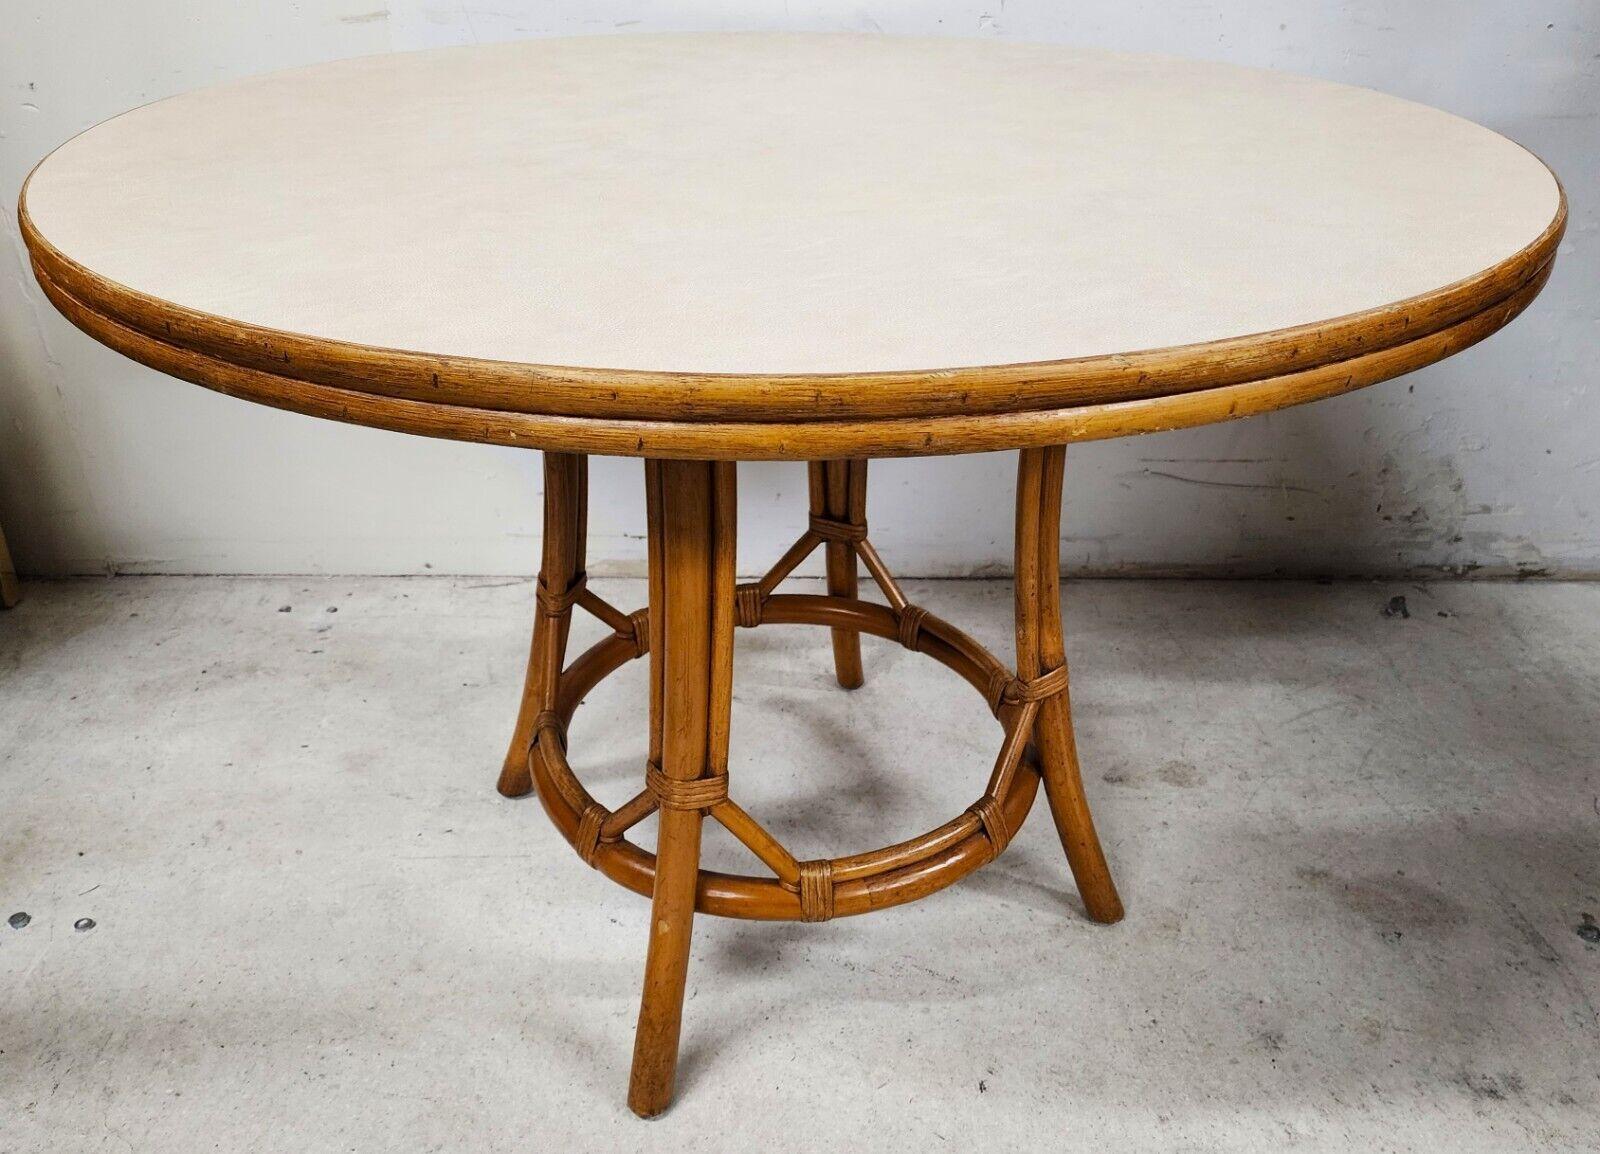 For FULL item description click on CONTINUE READING at the bottom of this page.

Offering One Of Our Recent Palm Beach Estate Fine Furniture Acquisitions Of A Vintage Bamboo Rattan Old Florida Boho Style Dining Table 
With a Mica top which is almost